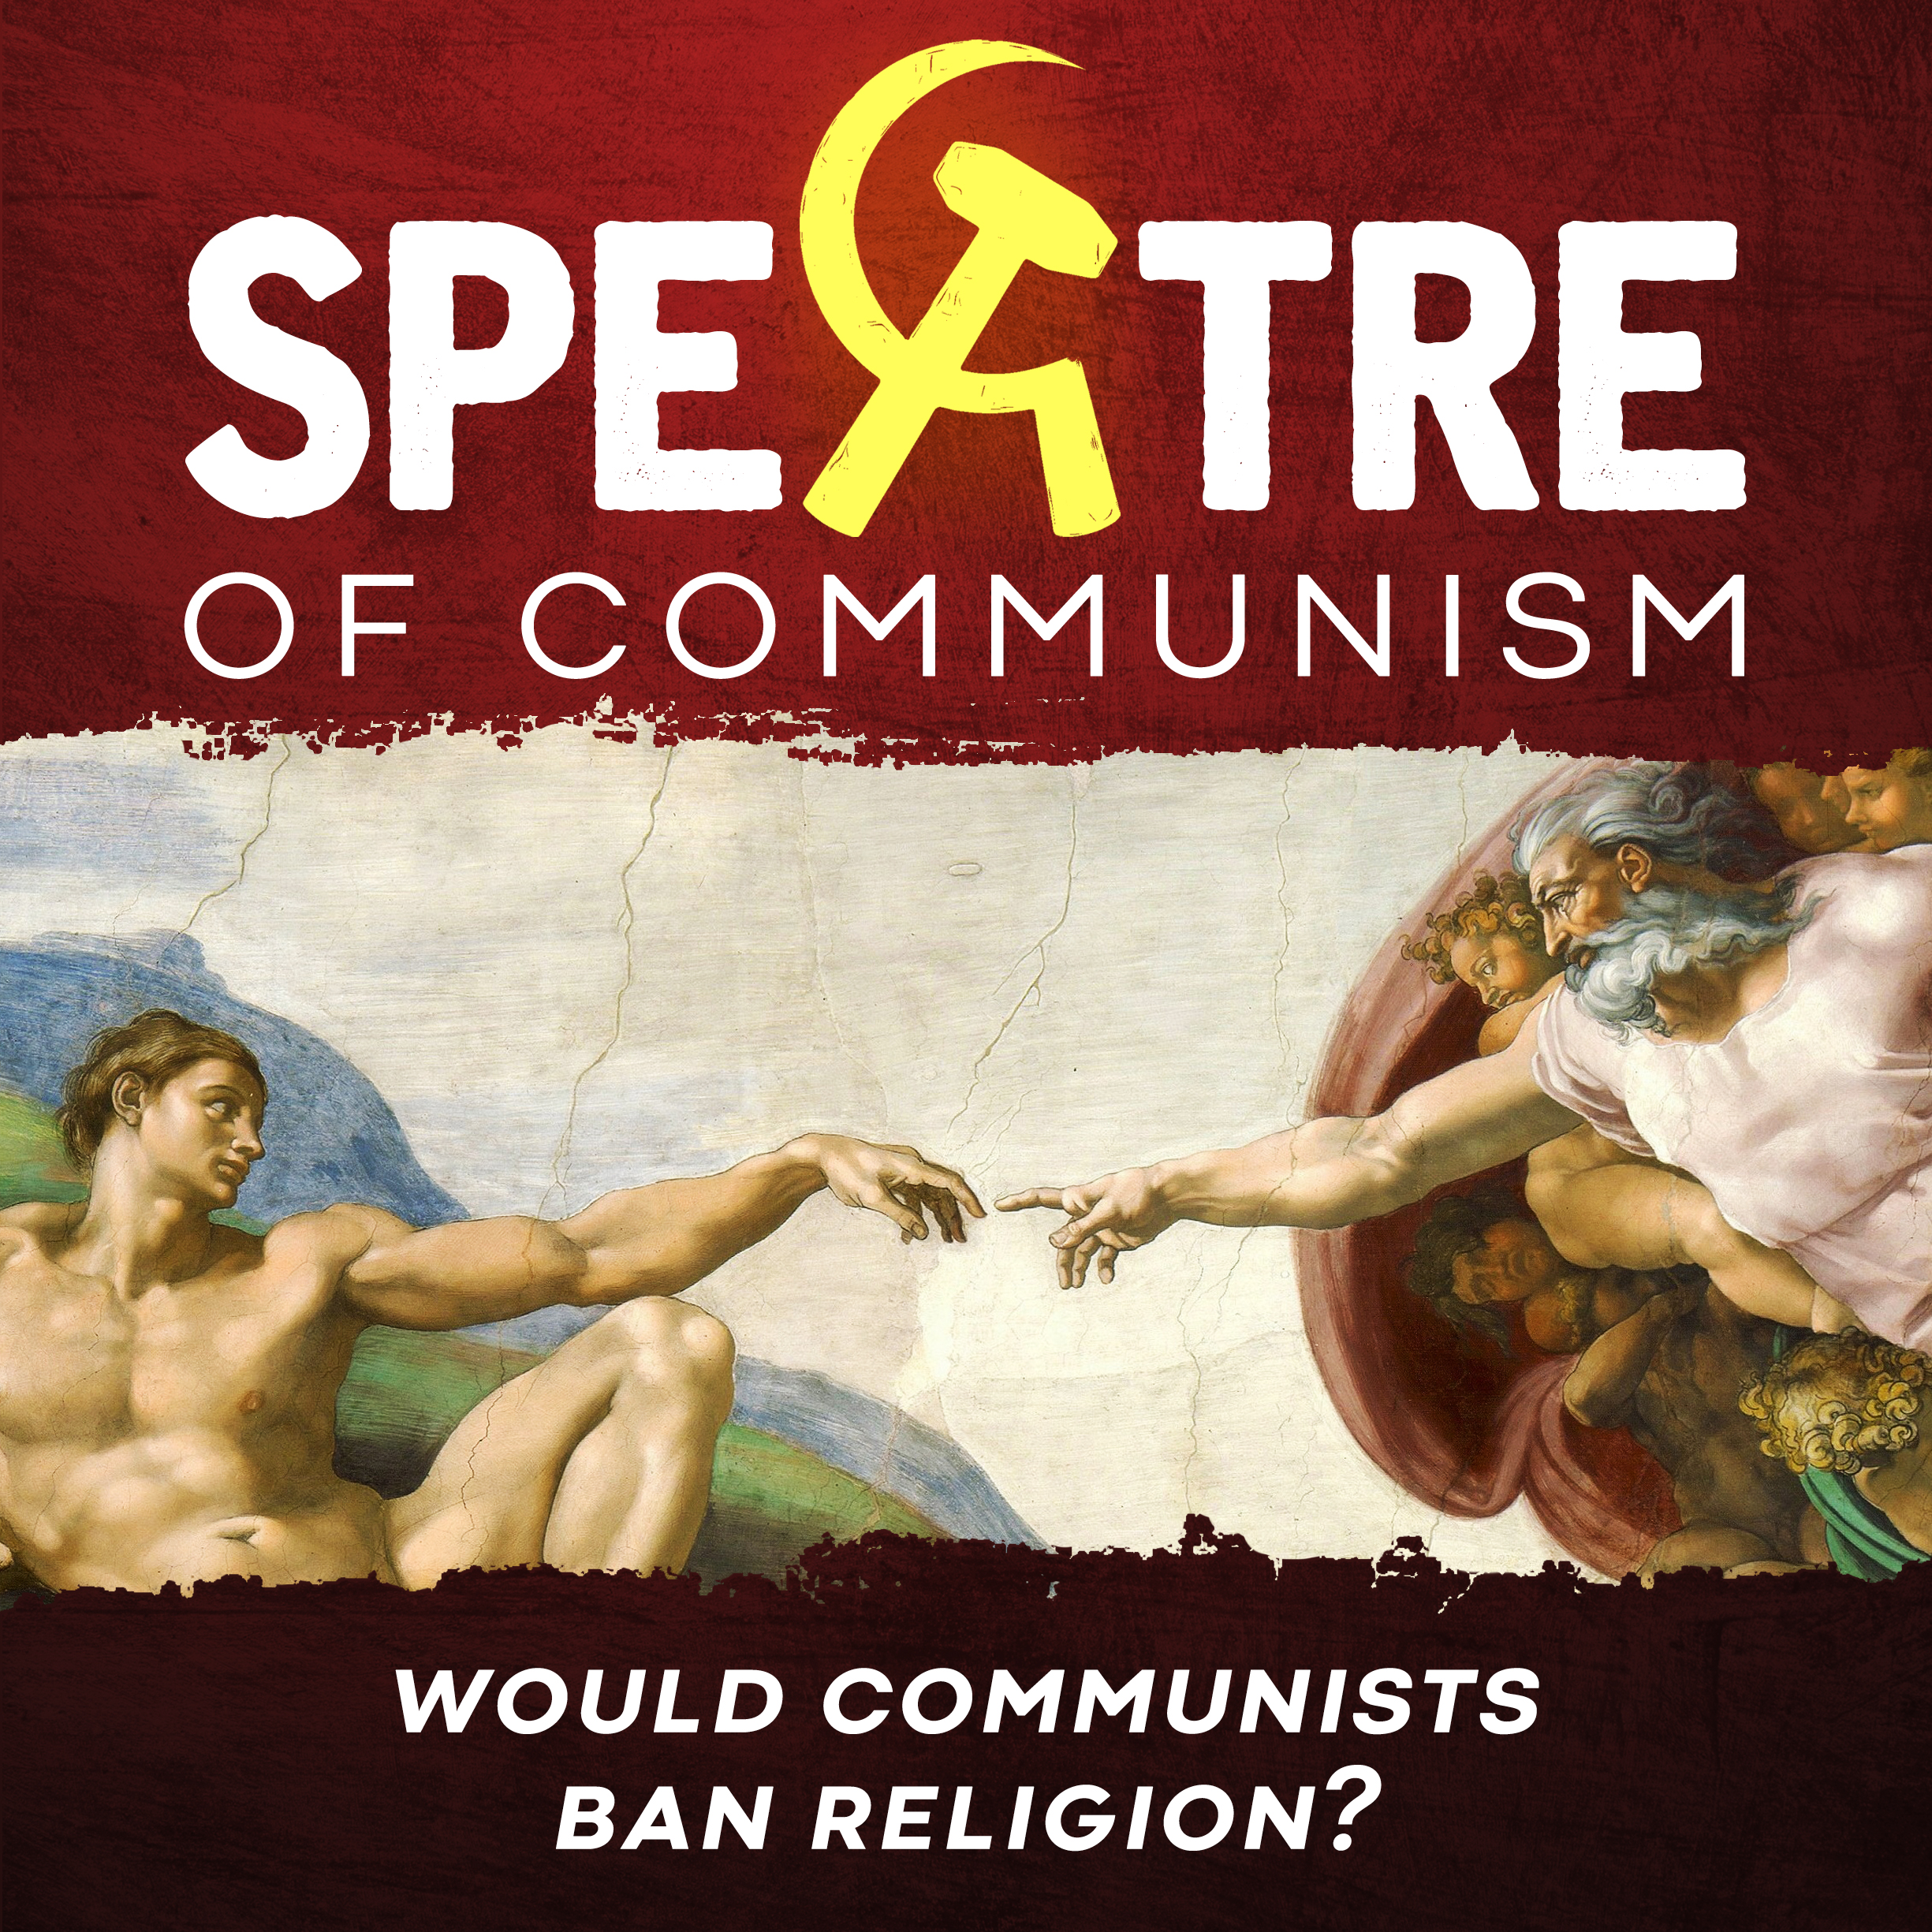 Would communists ban religion?